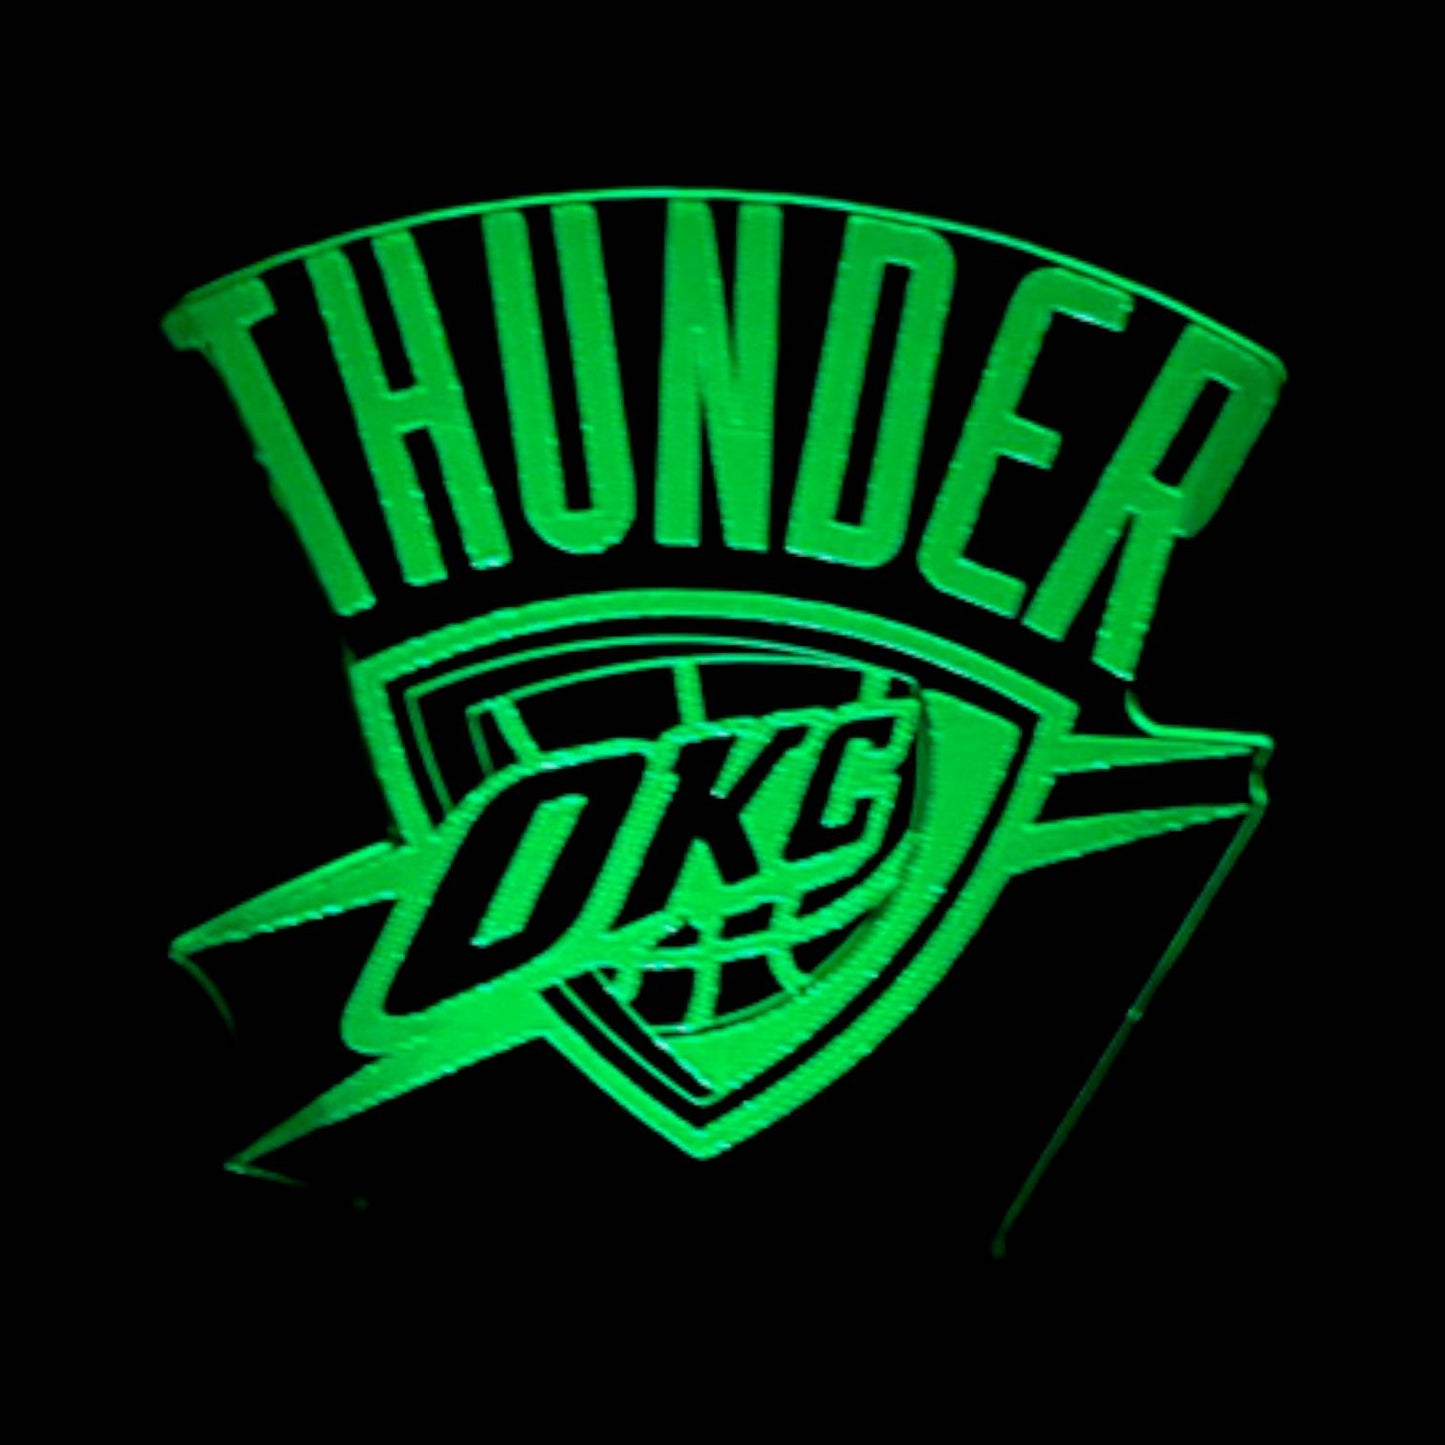 Oklahoma City Thunder 3D LED Night-Light 7 Color Changing Lamp w/ Touch Switch